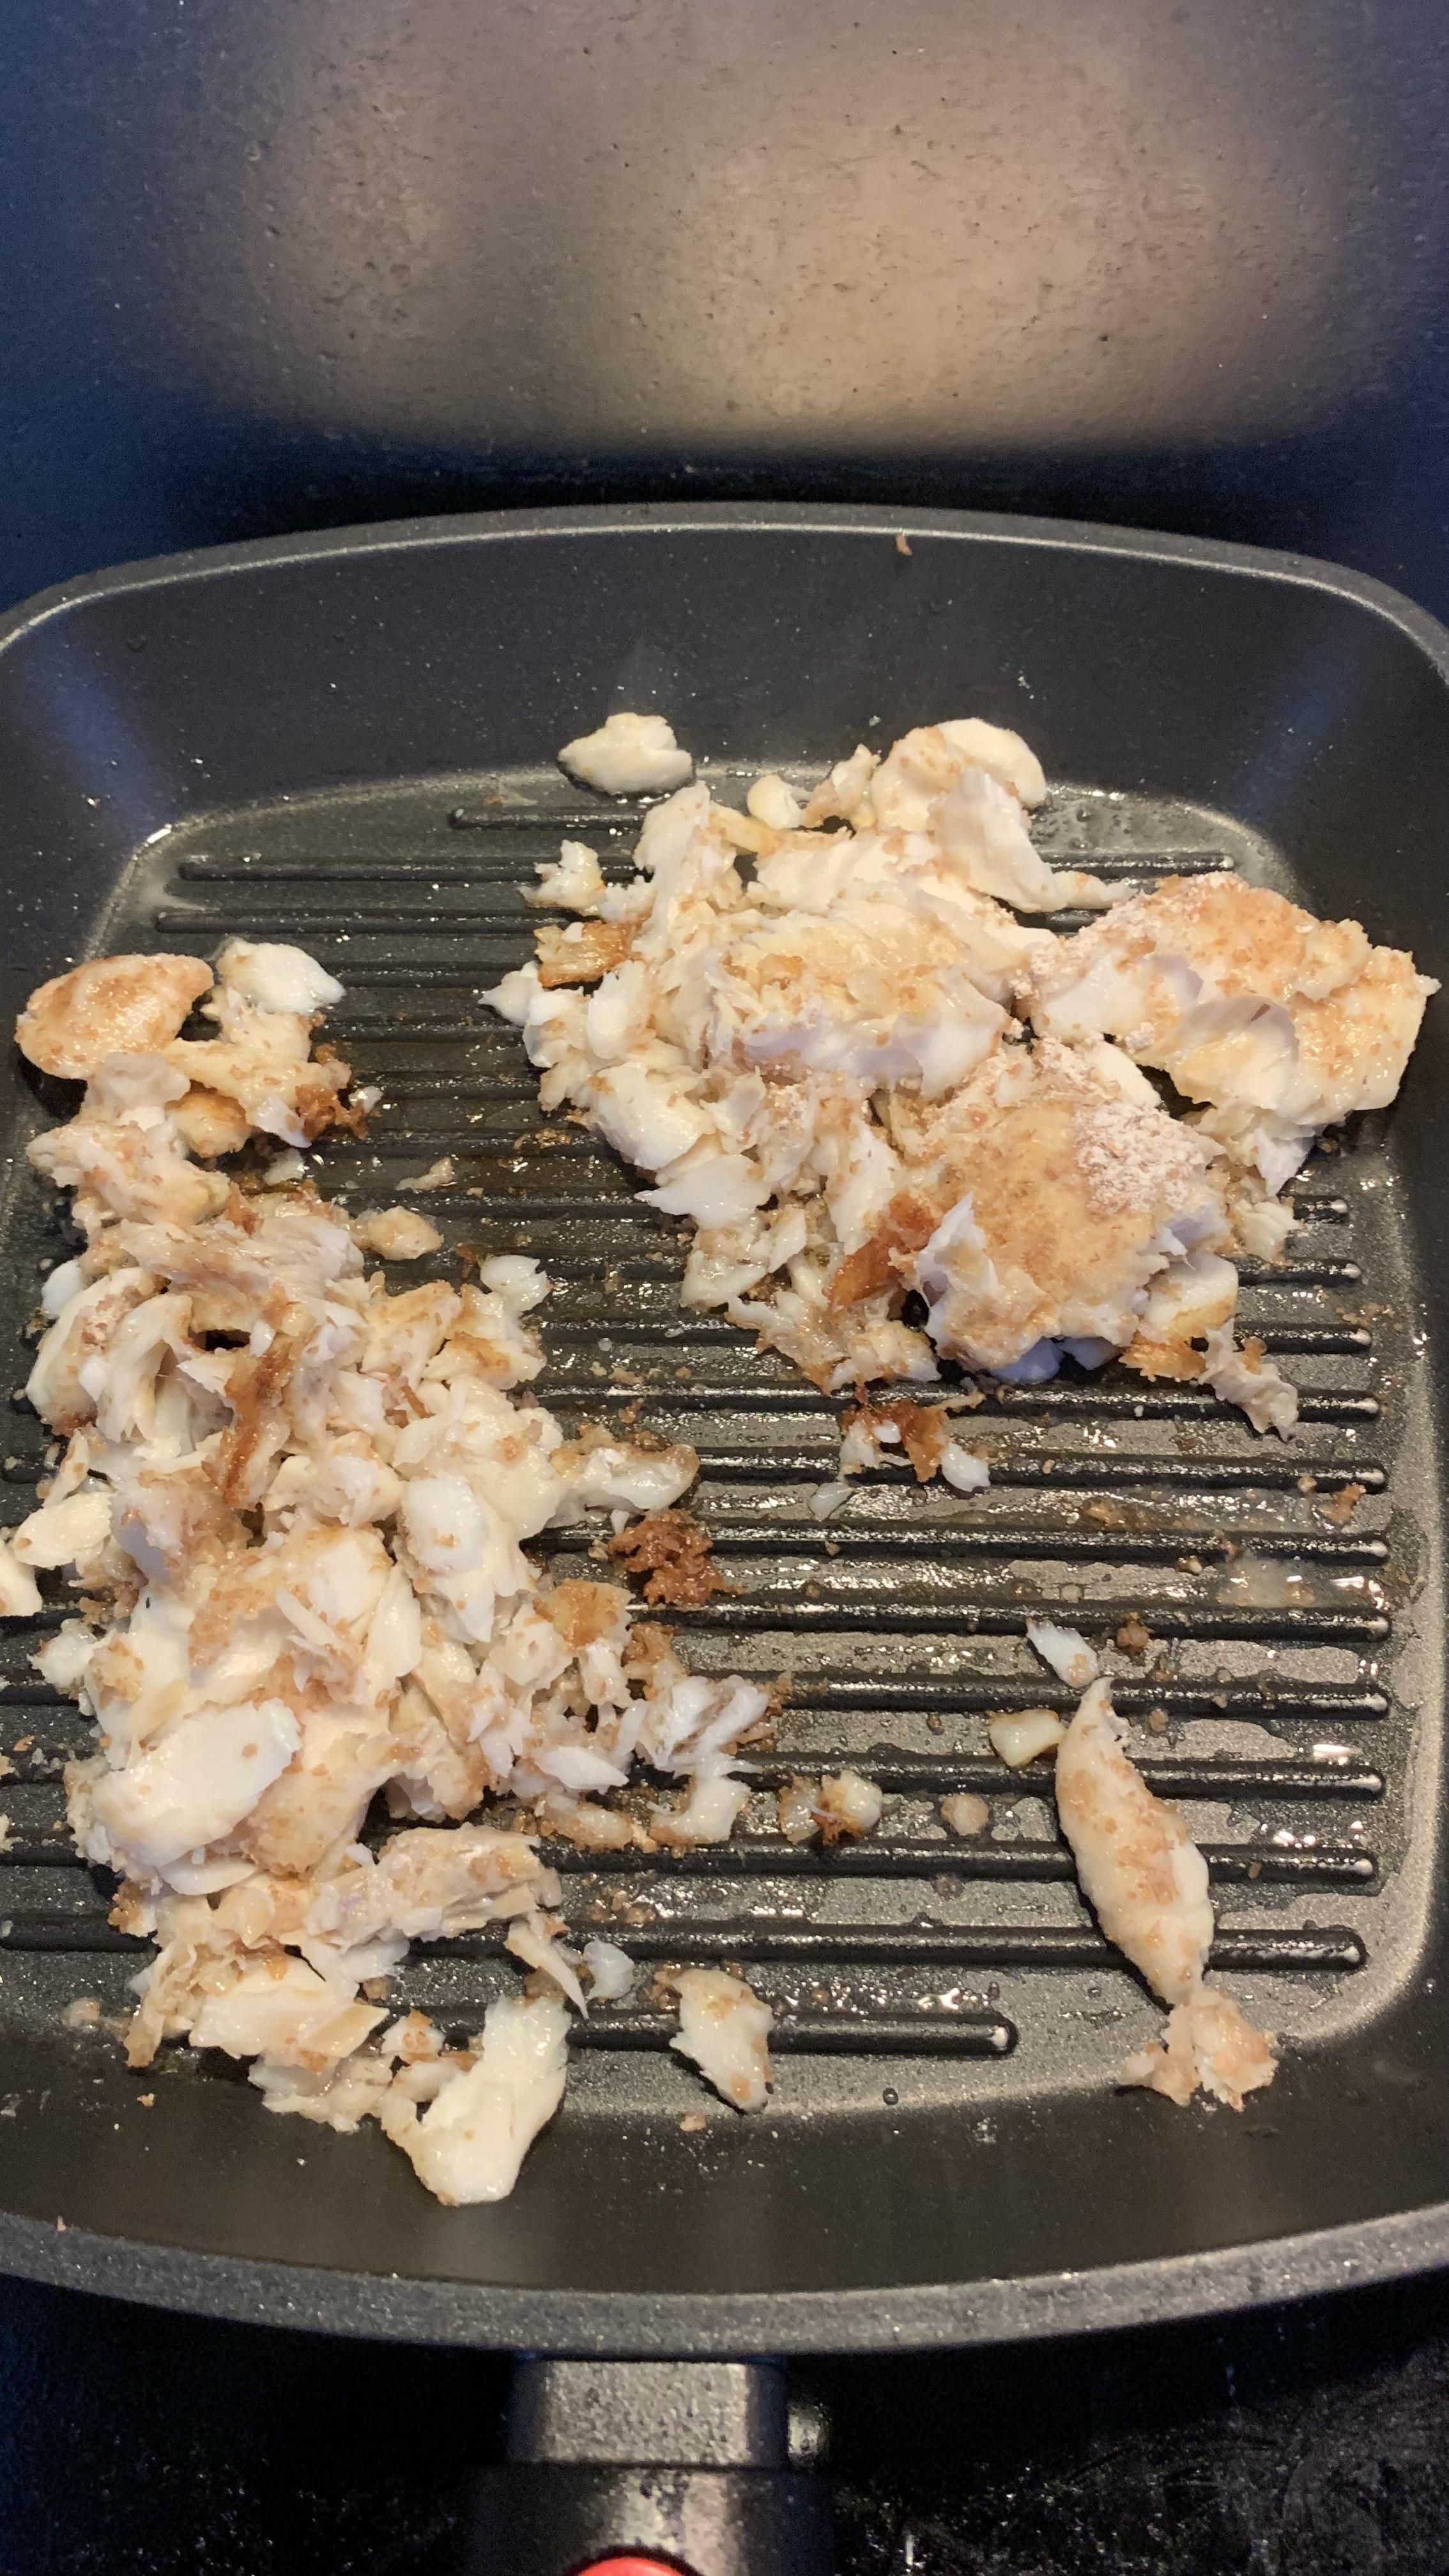 My girlfriend told me she has never cooked fish before. I didn’t expect scrambled haddock